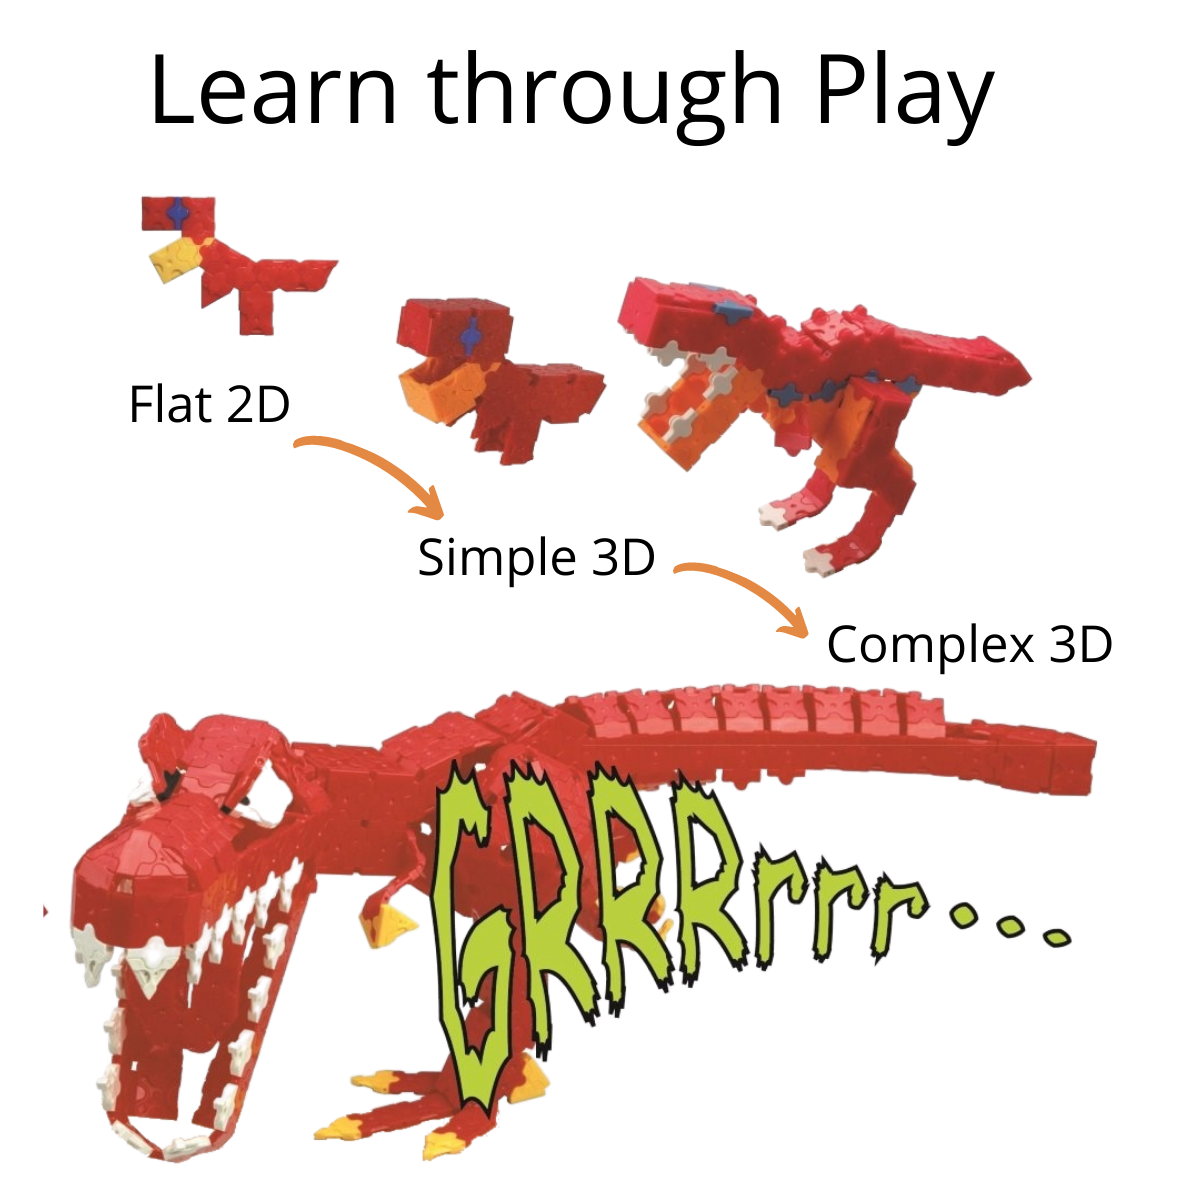 Play based learning with LaQ